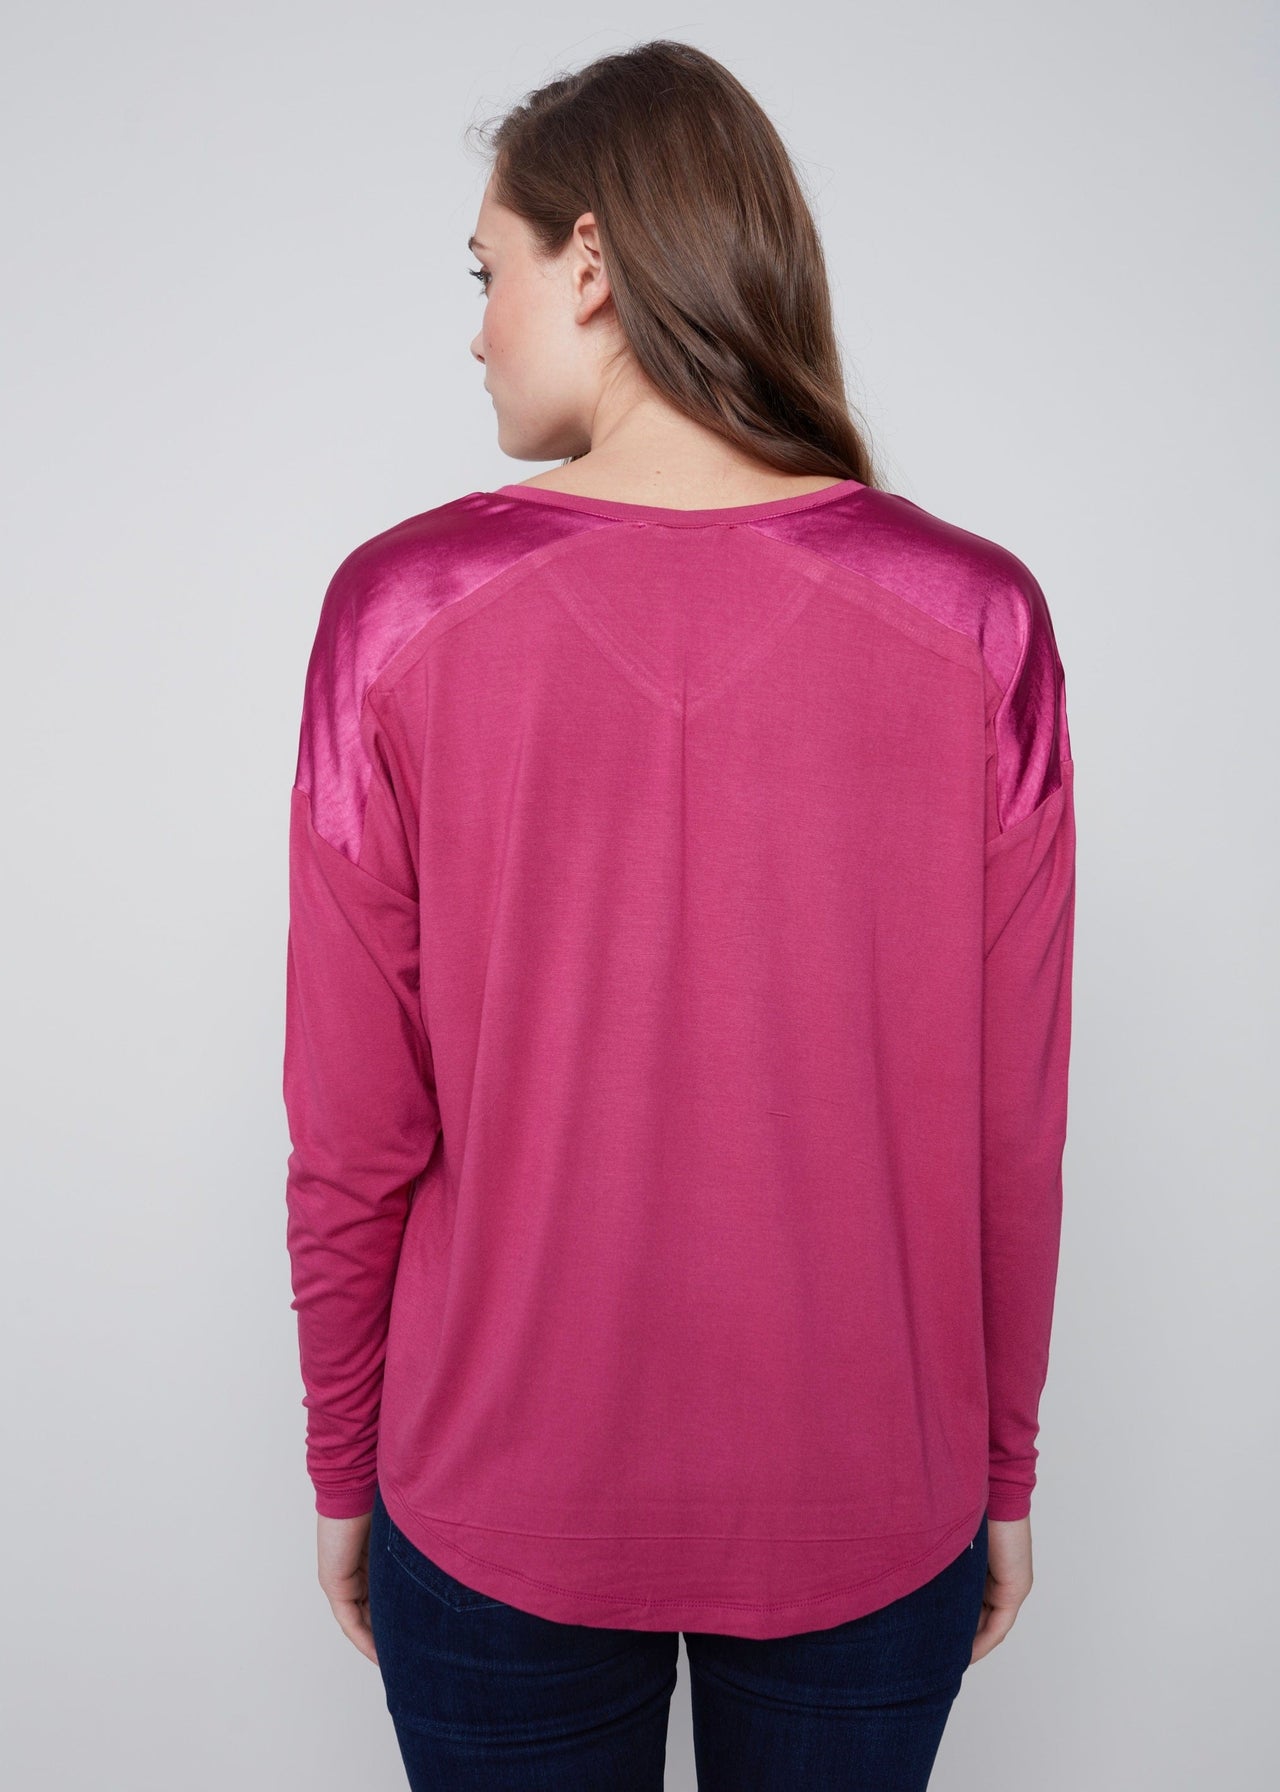 Charlie B Satin and Jersey Knit Top - Amethyst, XL